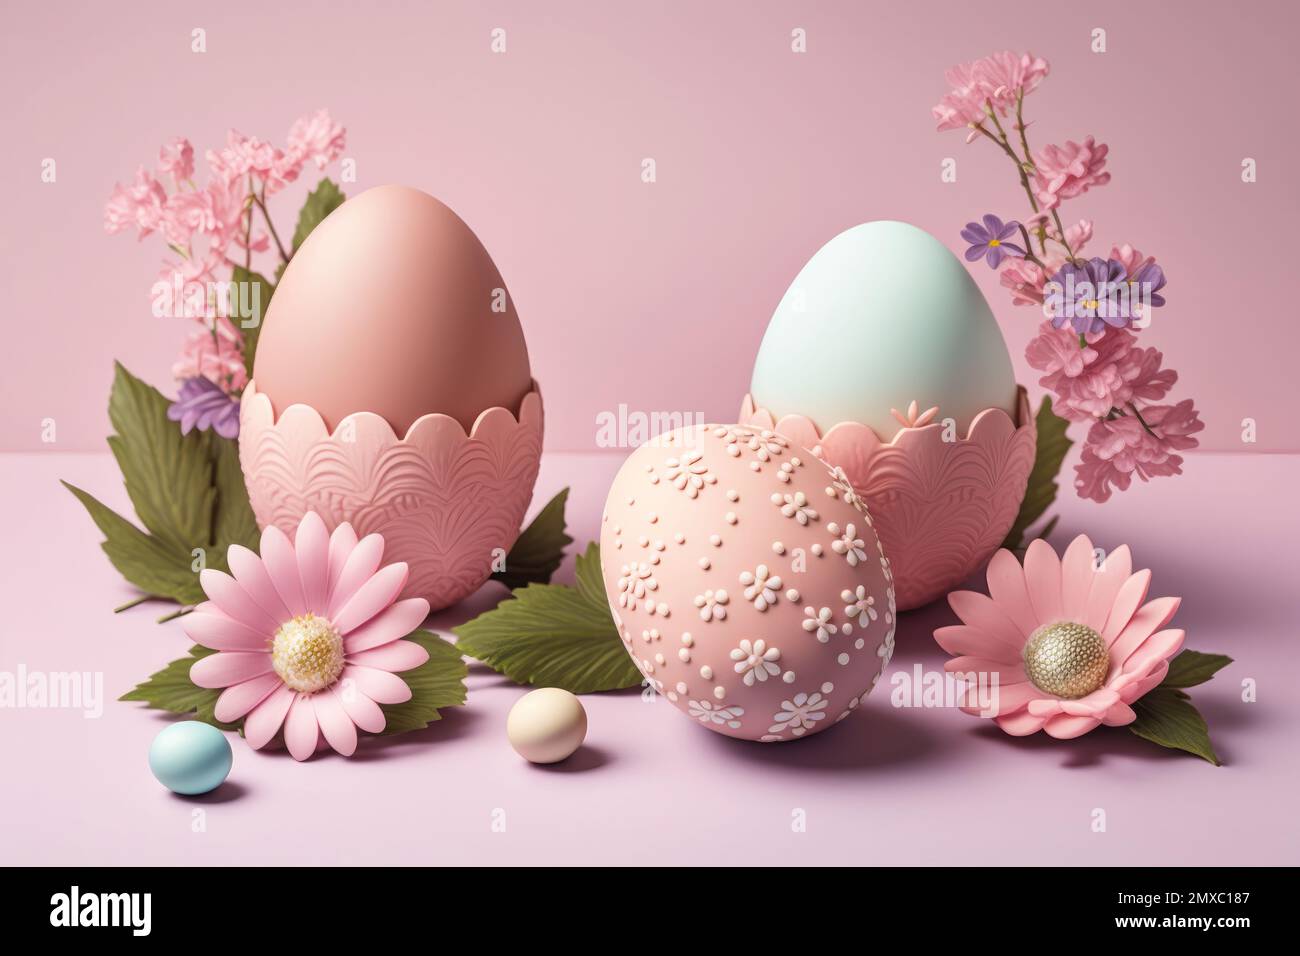 This sleek and modern Easter background is all about simplicity and sophistication. Against a clean white background, a minimal arrangement of fresh b Stock Photo